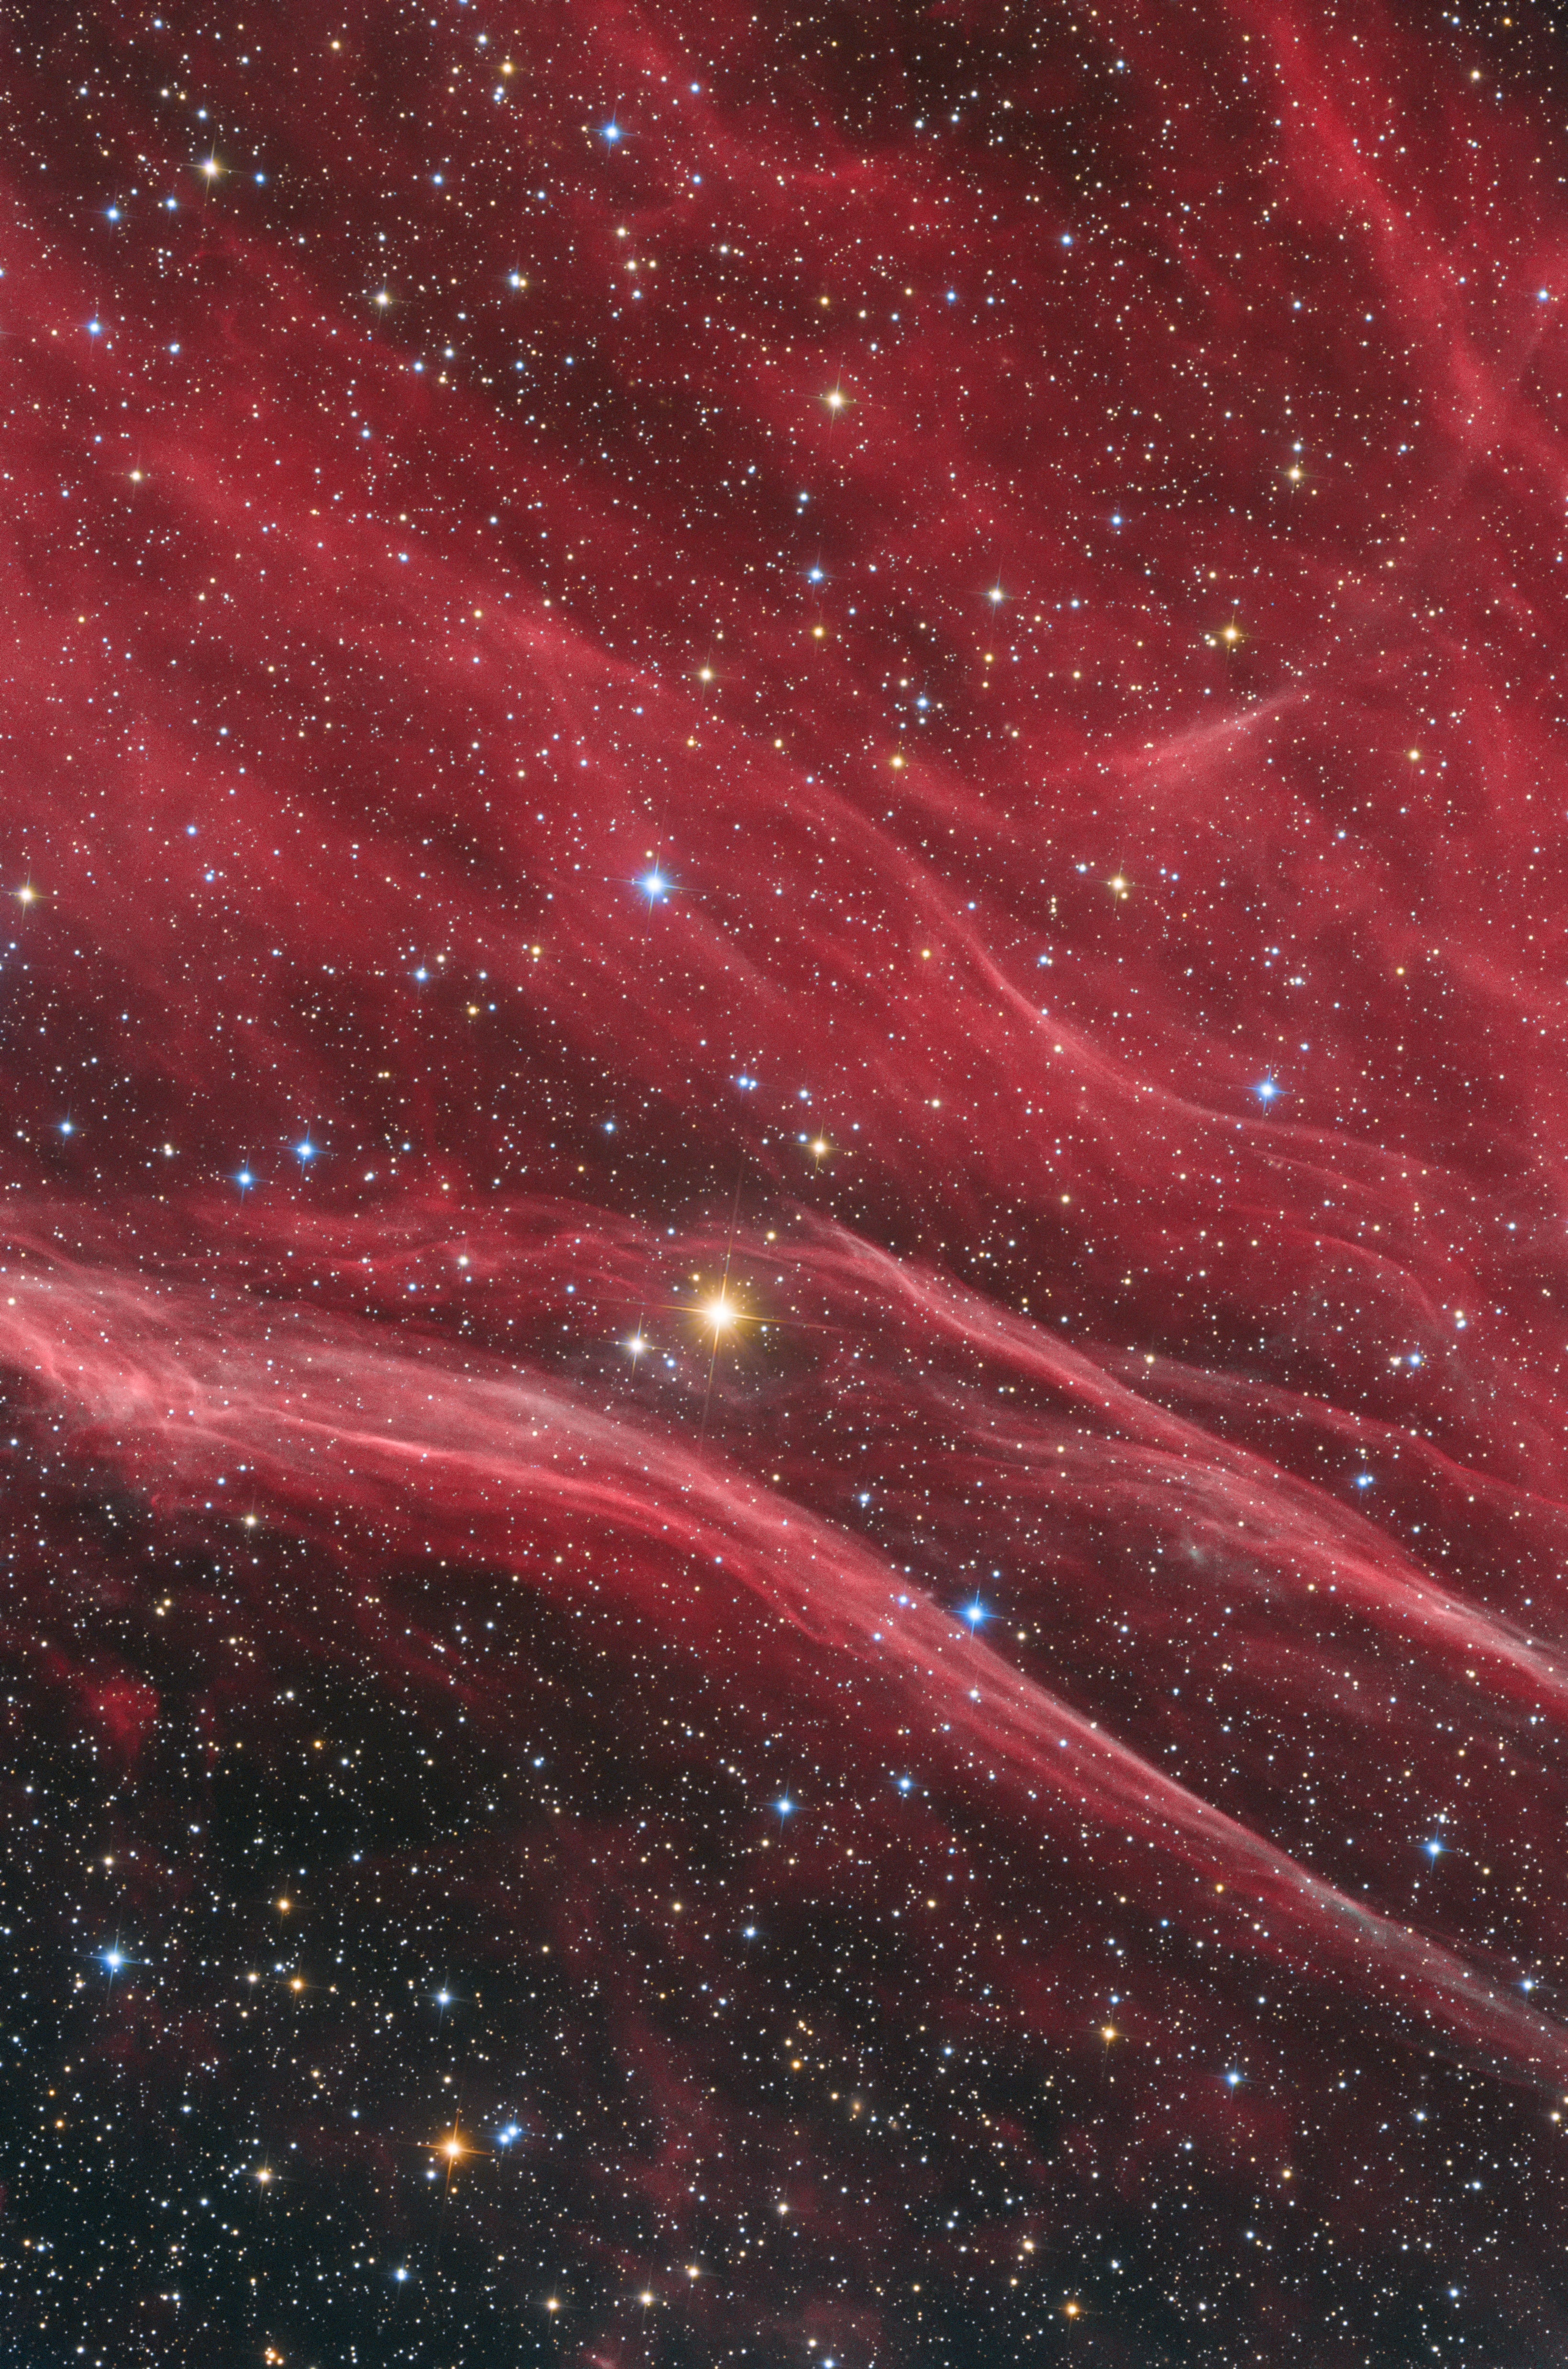 The wispy reds of a supernova remnant. (Image: © Paul Milvain)